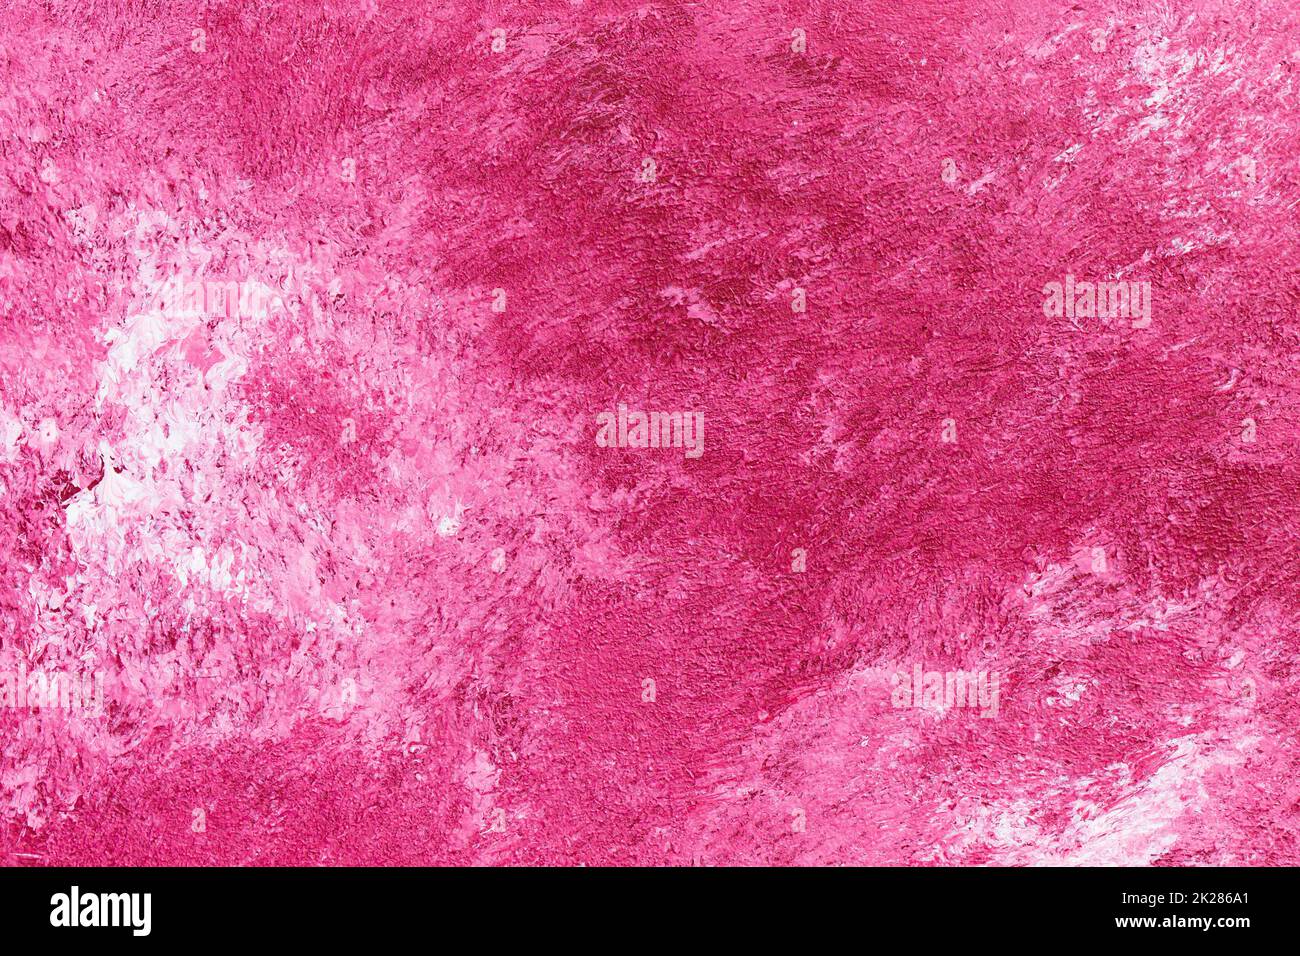 abstract pink background texture concrete wall Stock Photo